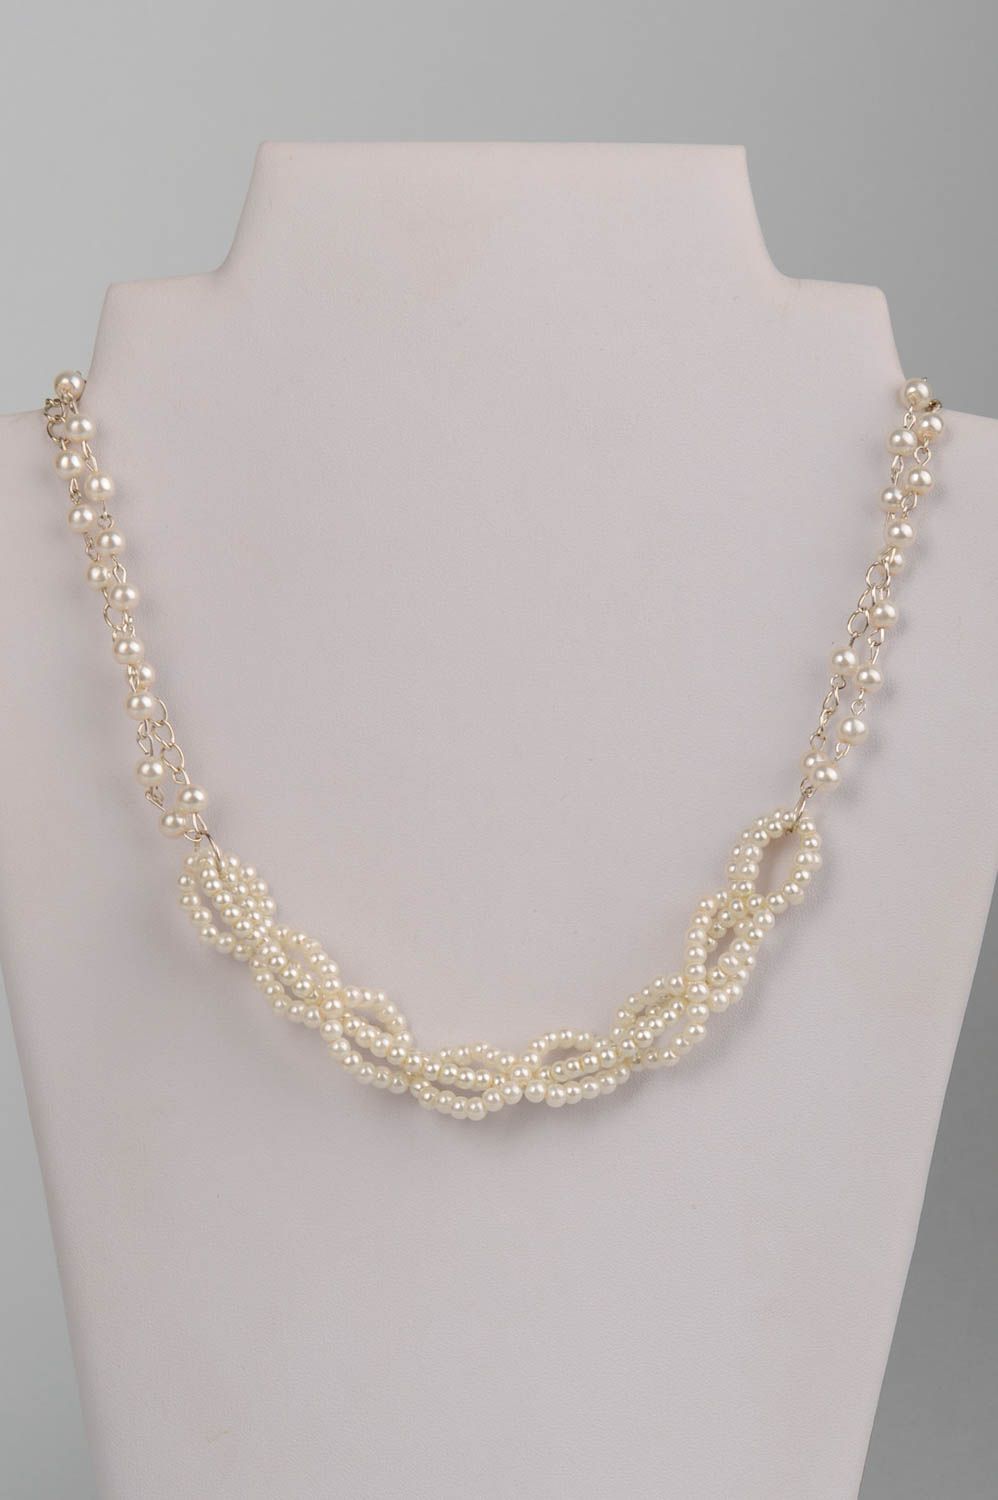 Handmade decorative white ceramic pearl beads necklace long fancy accessory photo 1